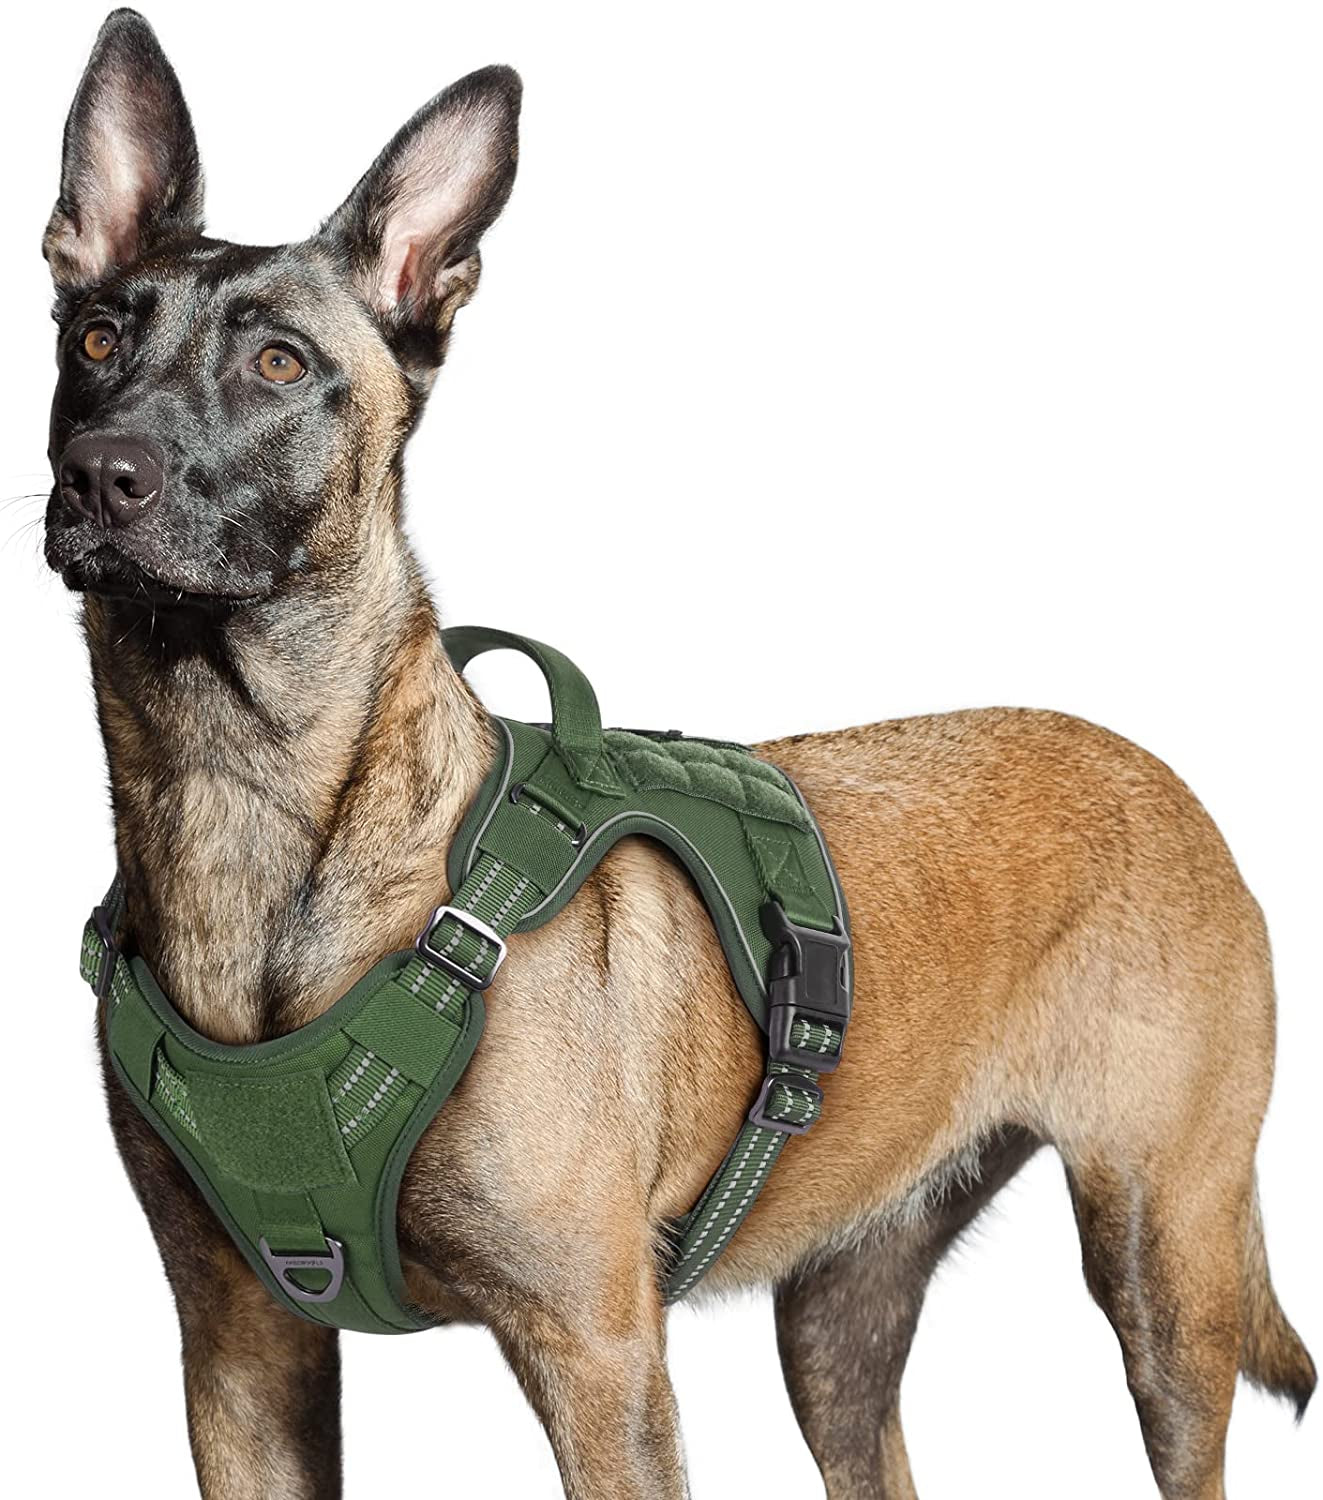 Rabbitgoo Tactical Dog Harness No Pull, Military Dog Vest Harness with Handle & Molle, Easy Control Service Dog Harness for Large Dogs Training Walking, Adjustable Reflective Pet Harness, Black, L